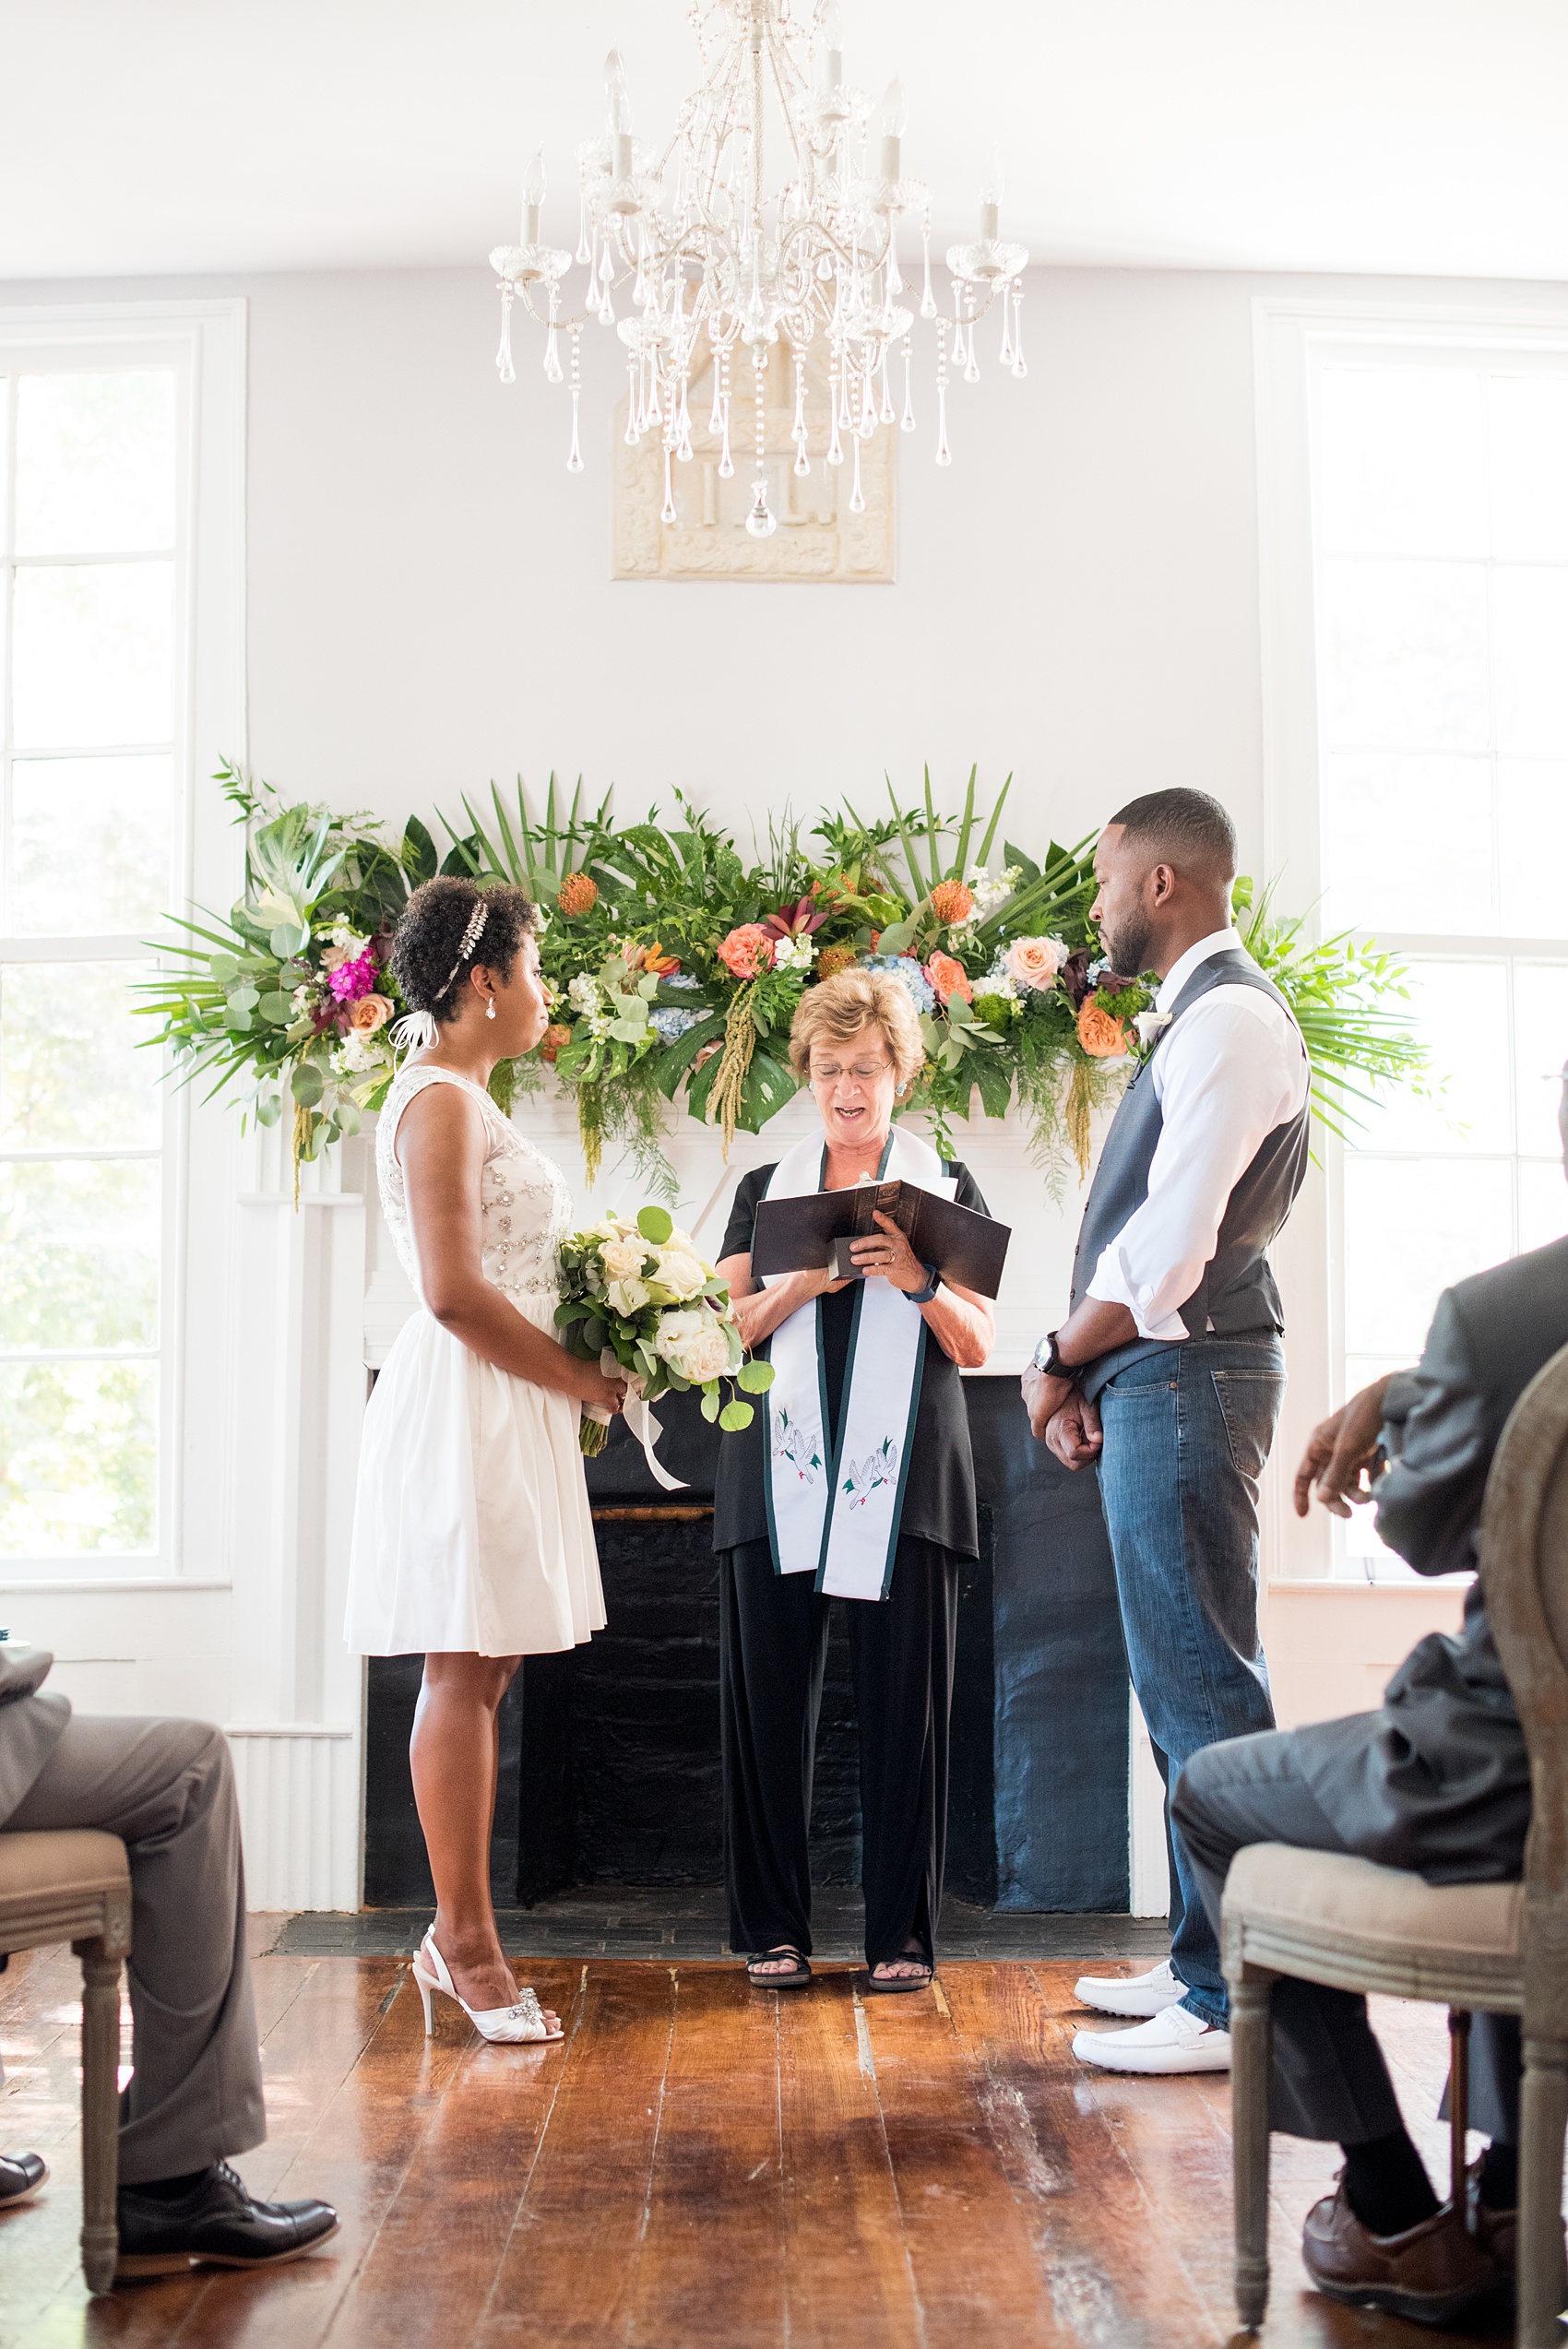 Mikkel Paige Photography pictures of a wedding at Leslie-Alford Mim's House in North Carolina for a Mad Dash Weddings event. Photo of the small elopement ceremony with the bride and groom inside the historic home with a tropical floral arrangement above the fireplace.